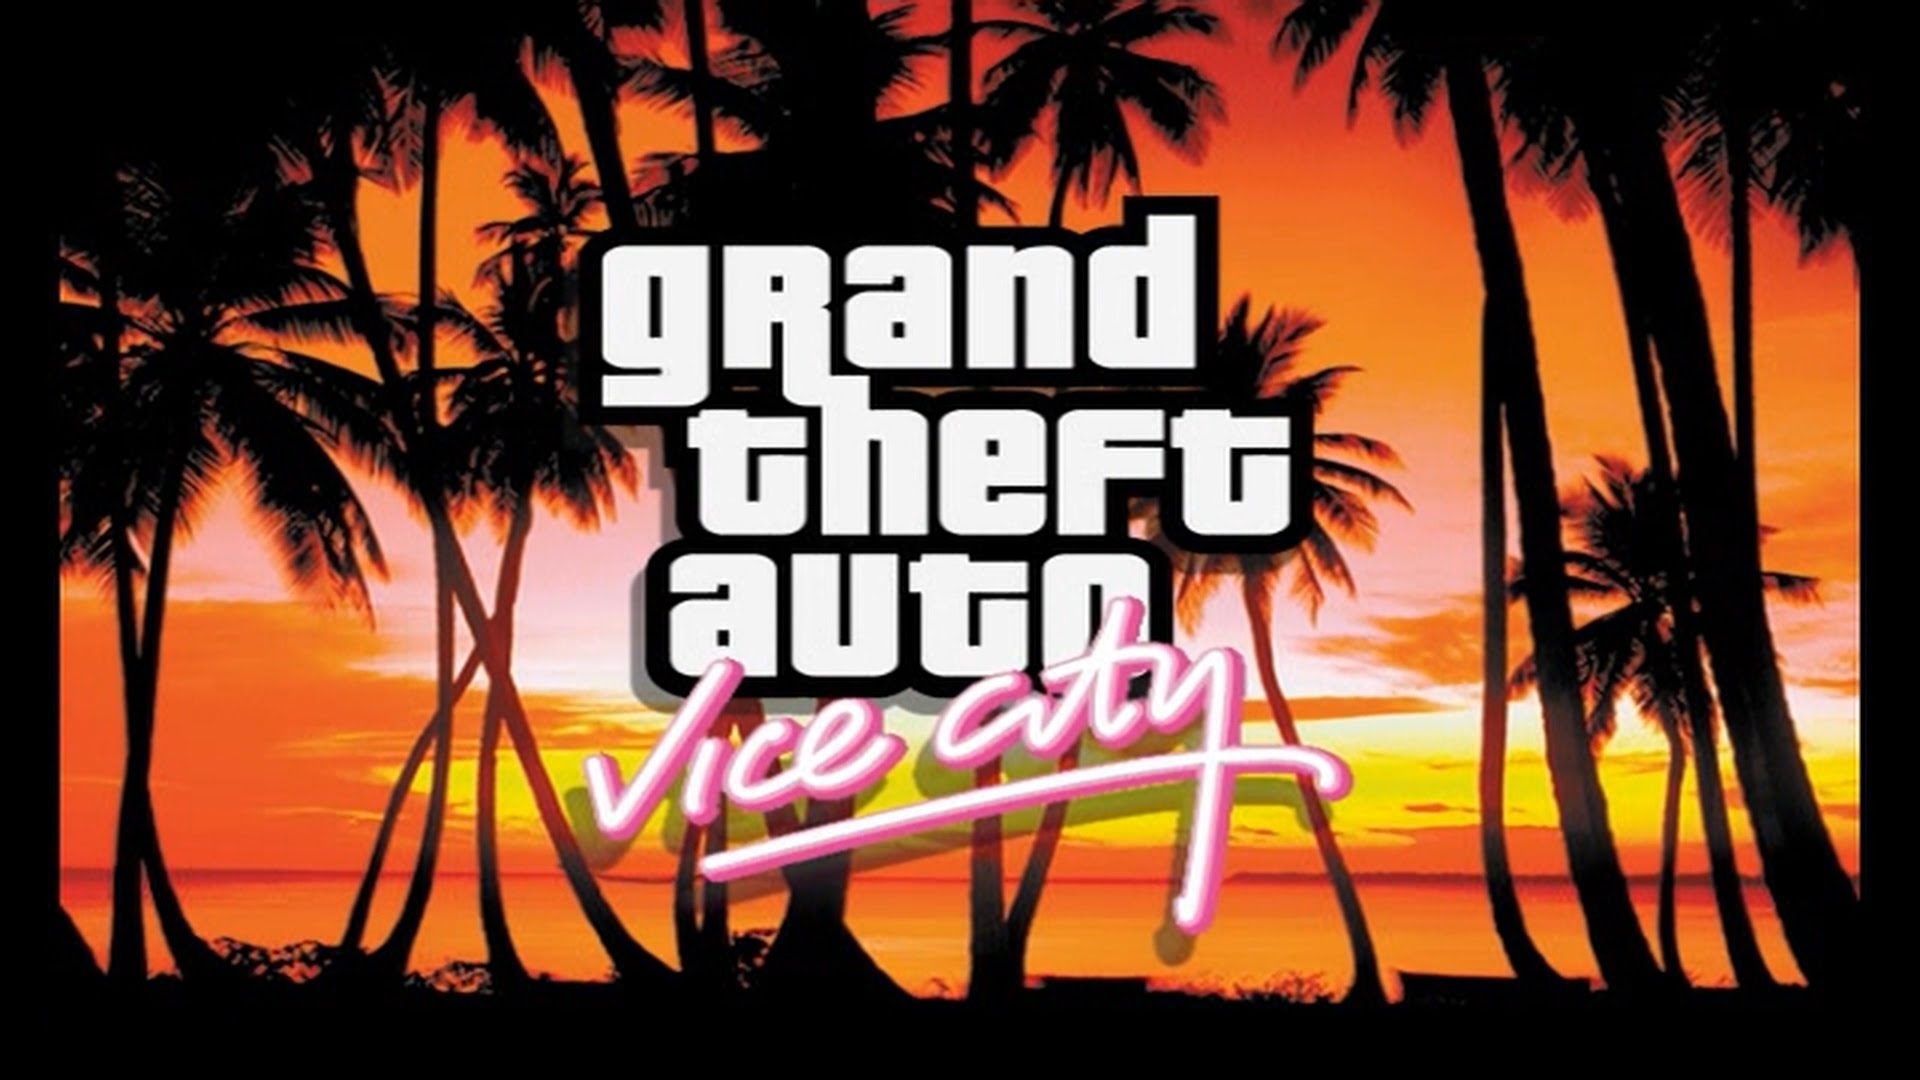 Free download Grand Theft Auto Vice City HD Wallpaper 12 1920 X 1080 stmednet [1920x1080] for your Desktop, Mobile & Tablet. Explore Grand Theft Auto: Vice City Wallpaper